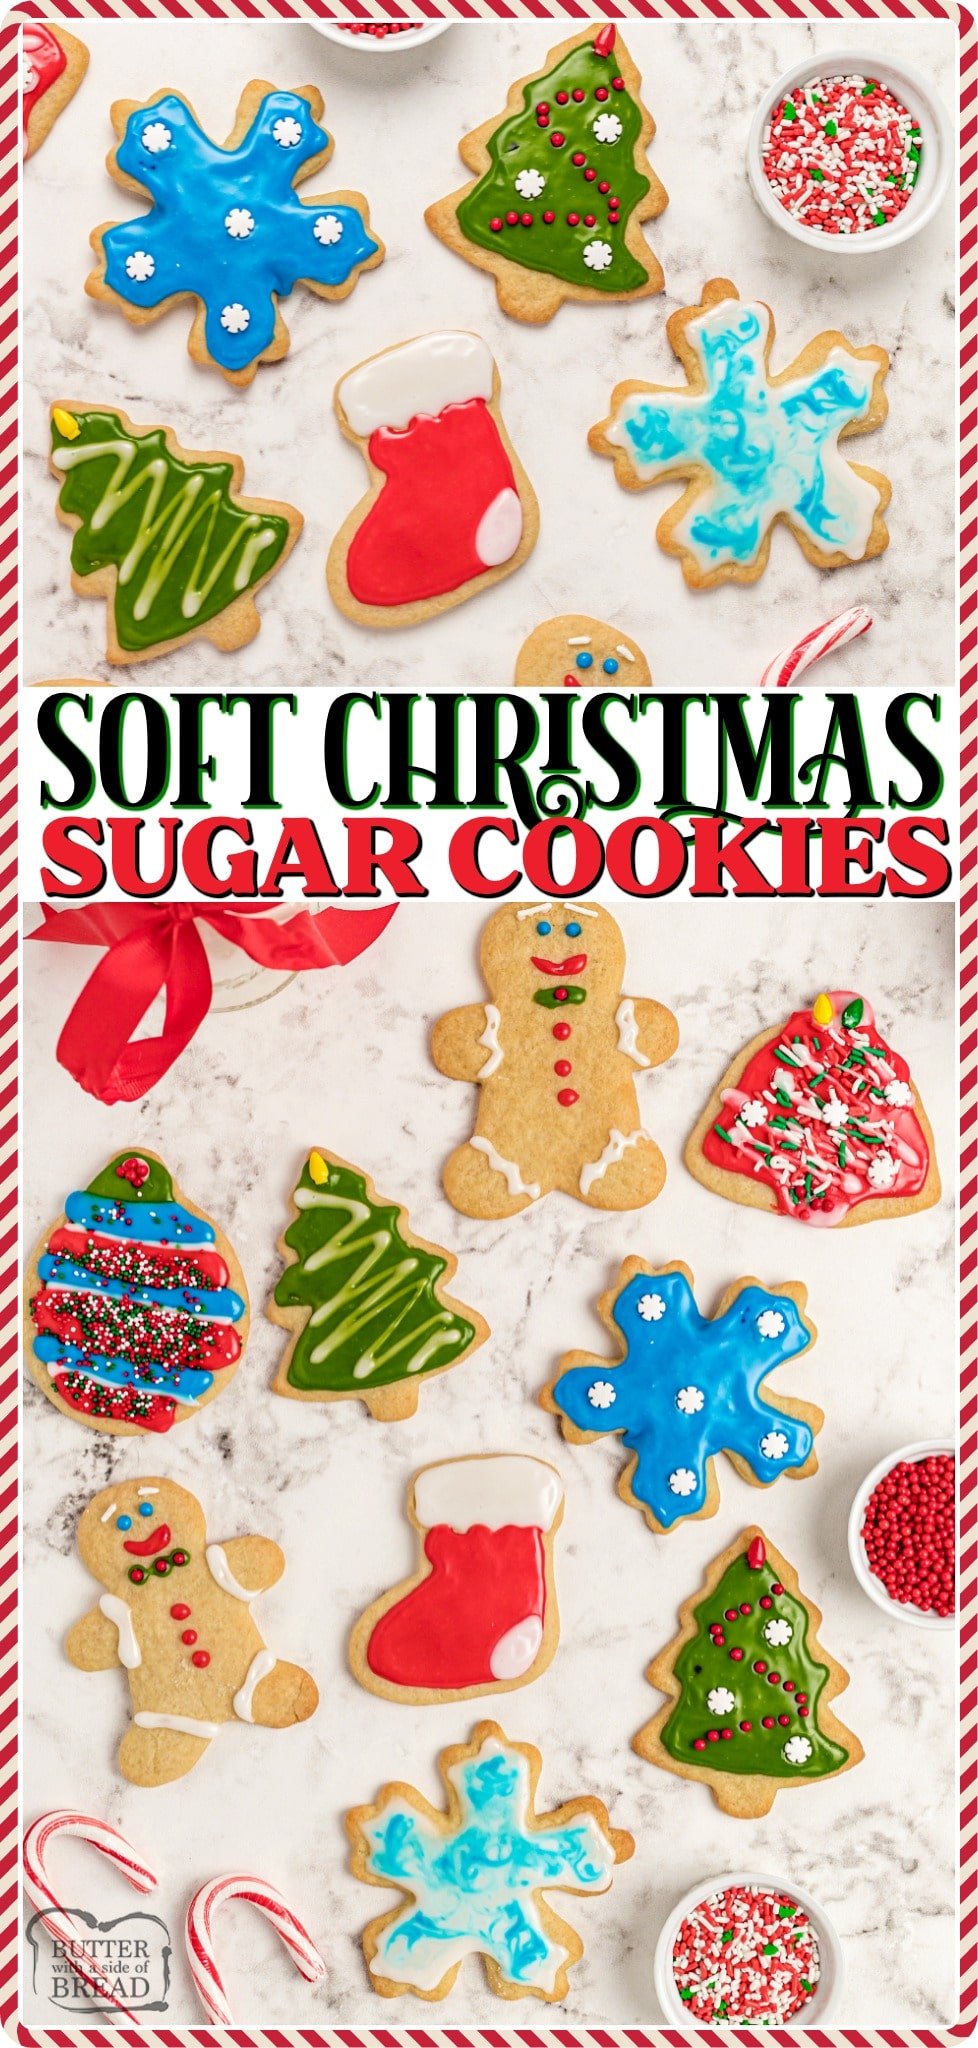 Soft Christmas Sugar Cookies made with classic ingredients & frosted with a simple Royal icing. Perfect holiday Sugar Cookie recipe for festive Christmas cut out cookies! #Christmas #cookies #cutout #sugarcookies #royalicing #baking #easyrecipe from BUTTER WITH A SIDE OF BREAD